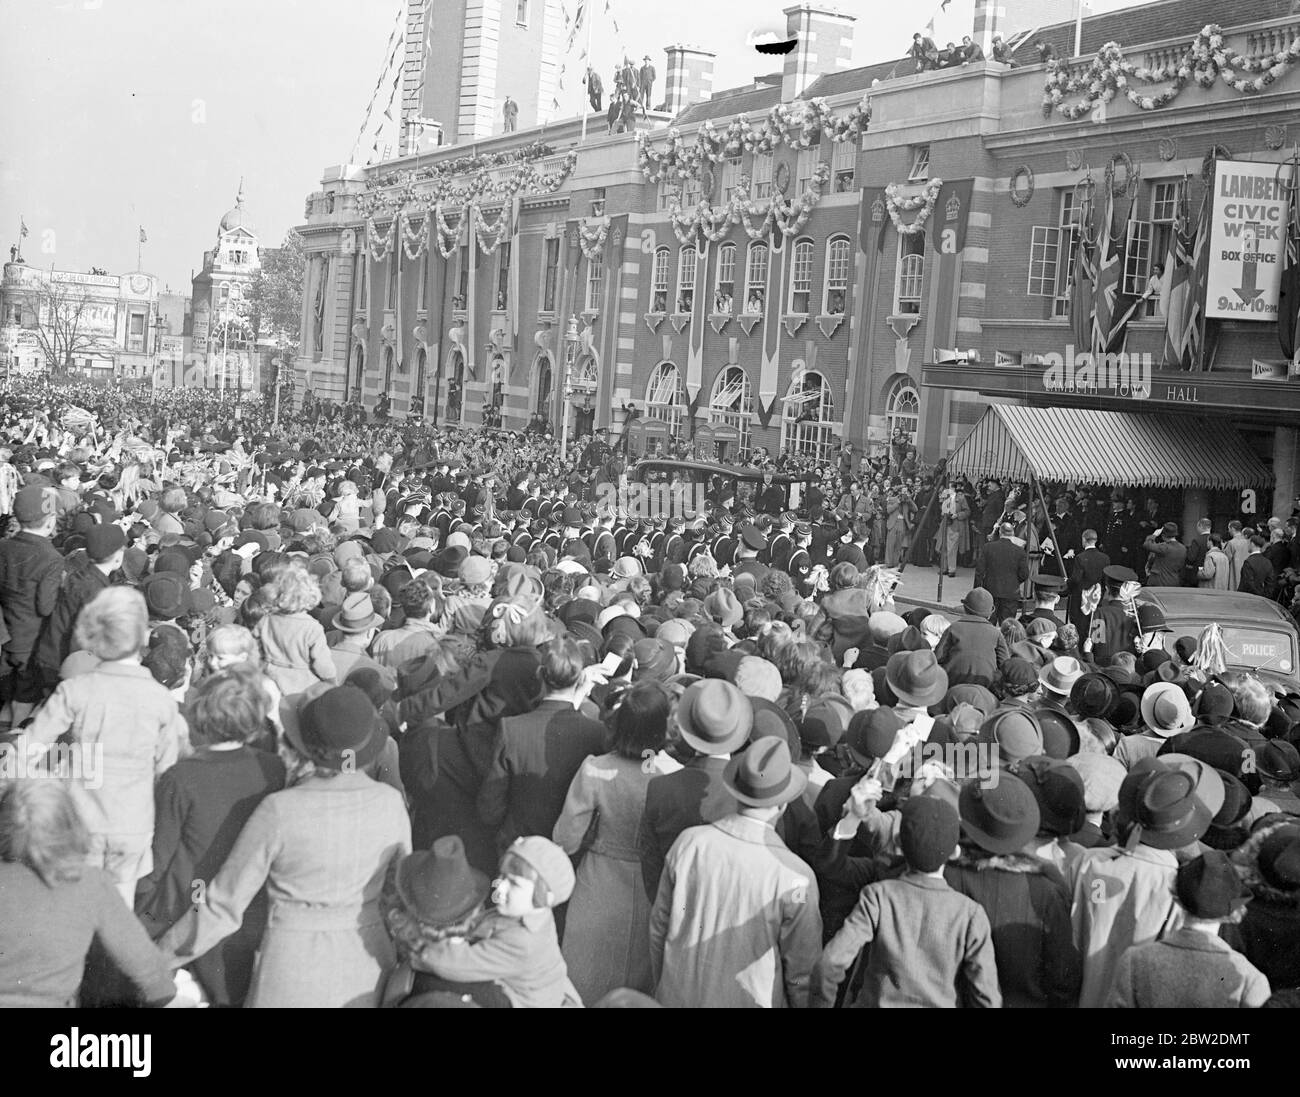 Queen Mary received an enthusiastic welcome when she visited Brixton to open the new Â£90,000 extension to Lambeth Town Hall. Photo shows: The great crowds which greeted Queen Mary. 14 October 1938 Stock Photo